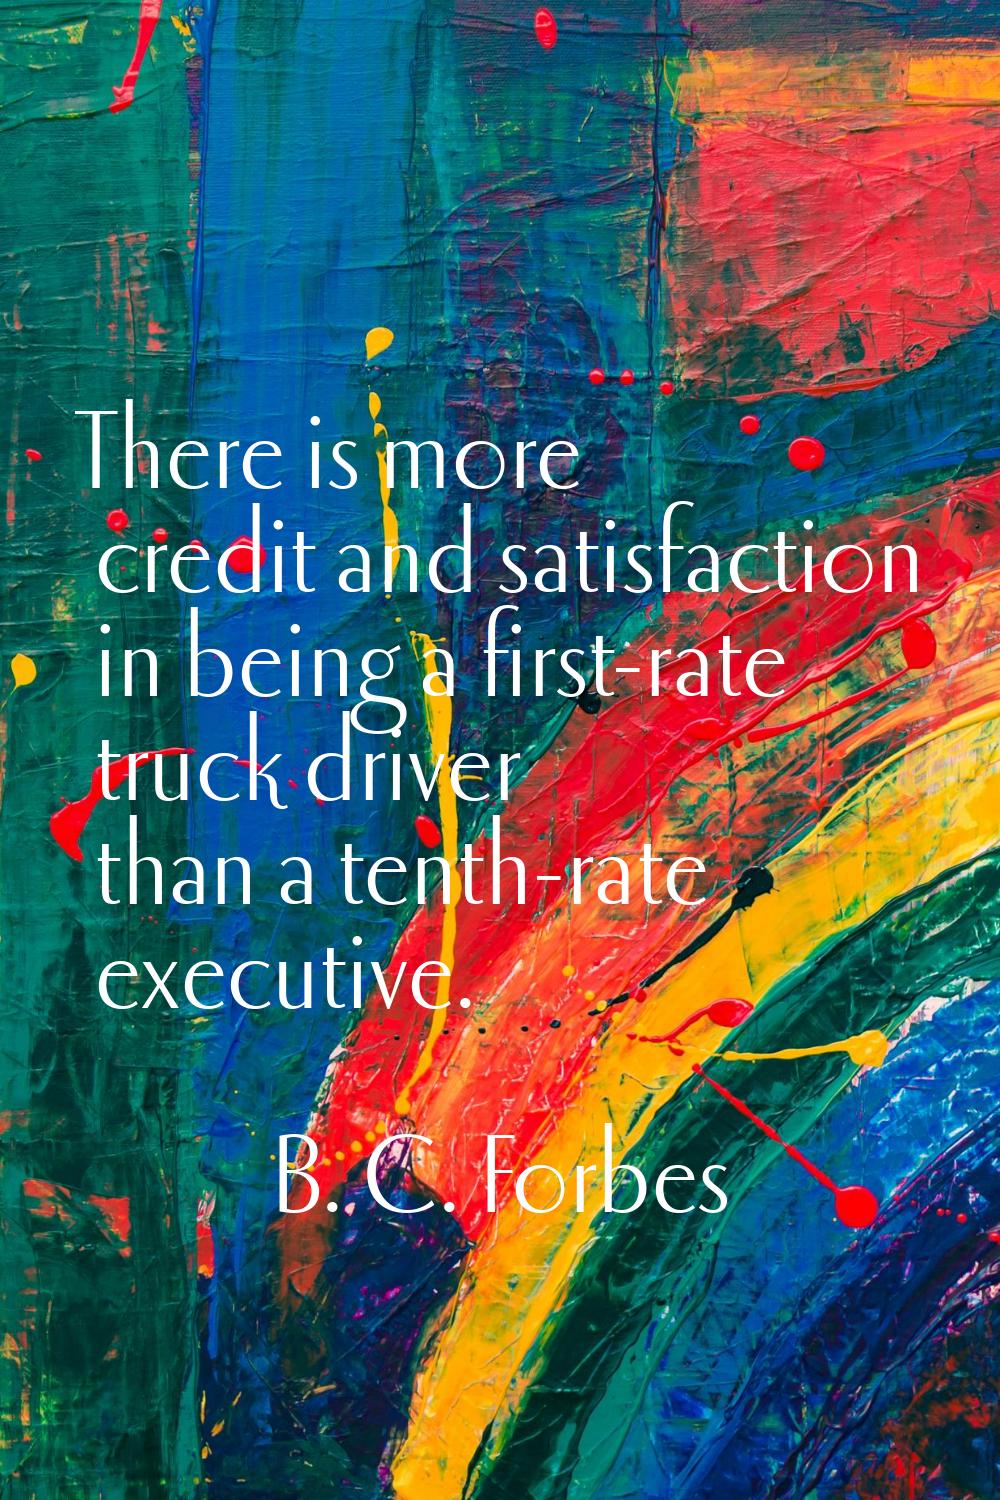 There is more credit and satisfaction in being a first-rate truck driver than a tenth-rate executiv